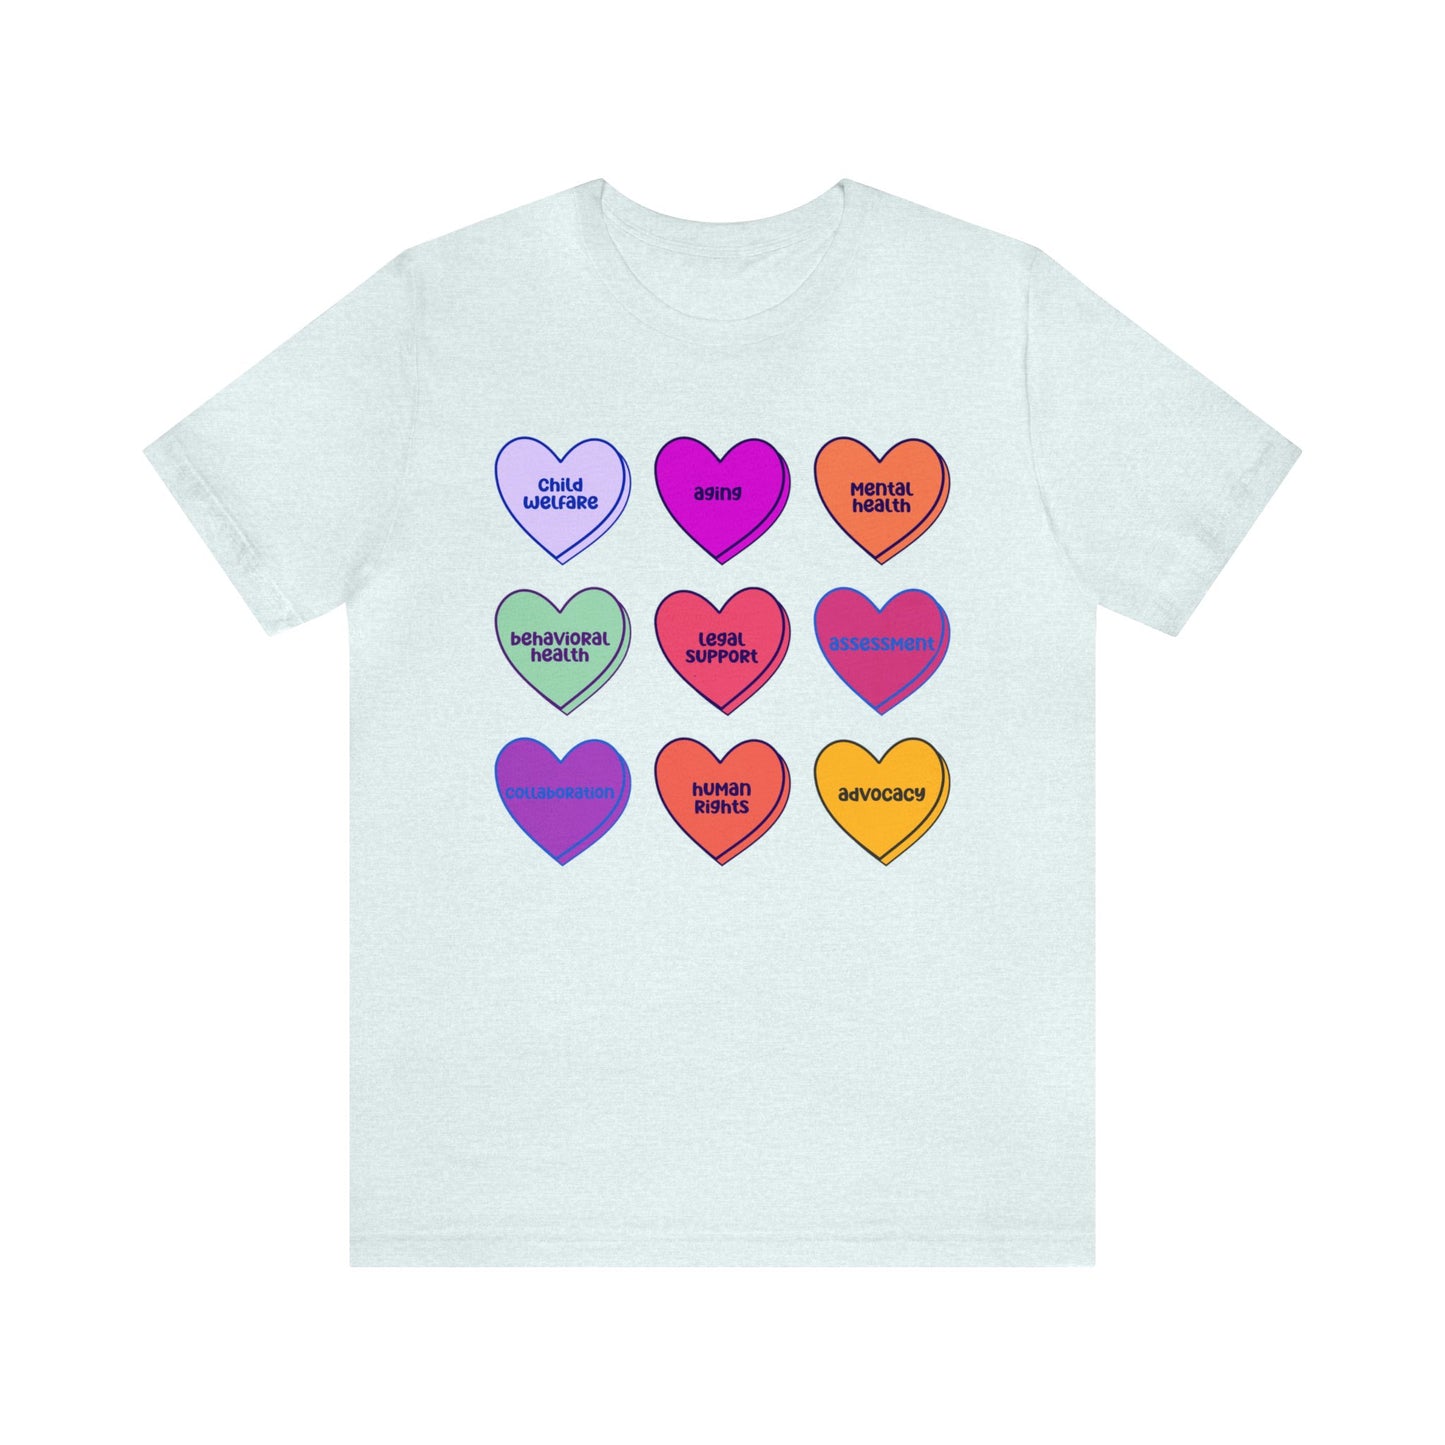 Social Worker Scope of Practice Tee - Valentine Edition